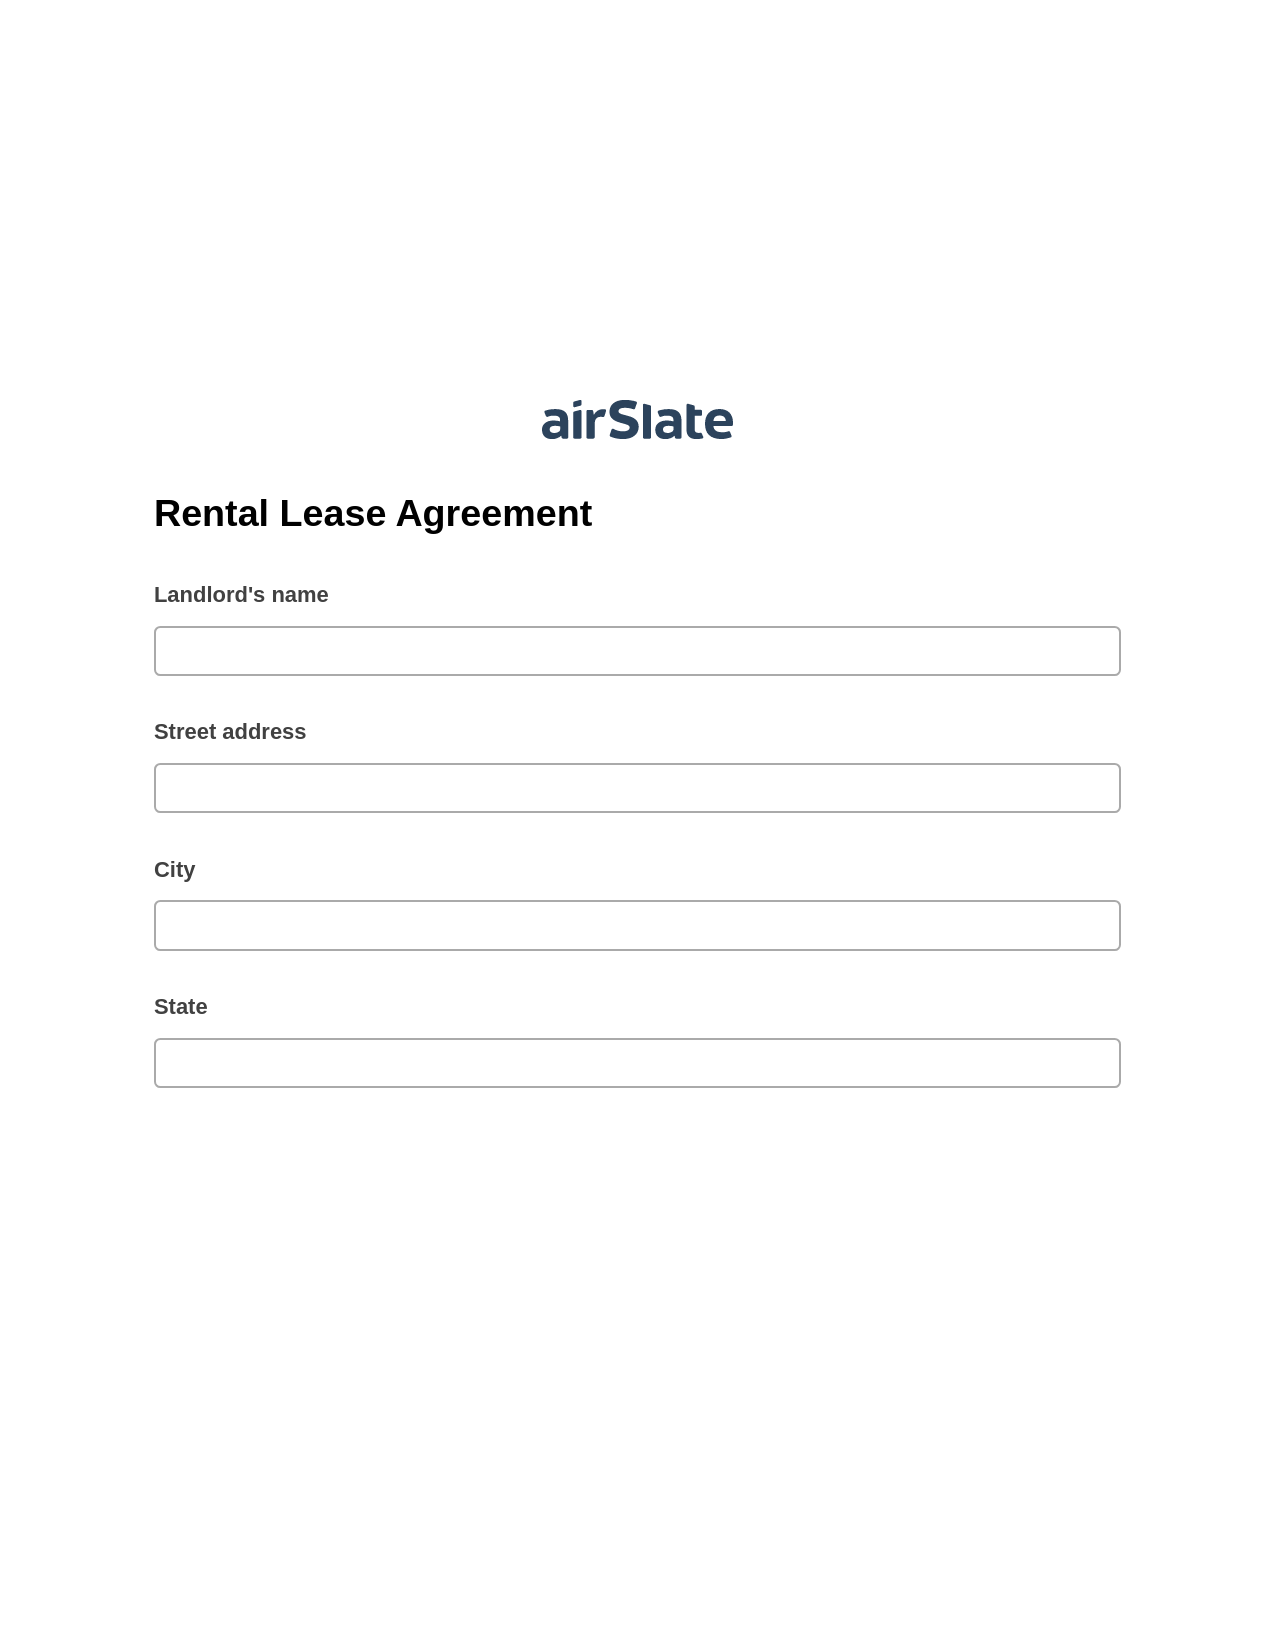 Rental Lease Agreement Pre-fill from another Slate Bot, Google Cloud Print Bot, Archive to SharePoint Folder Bot